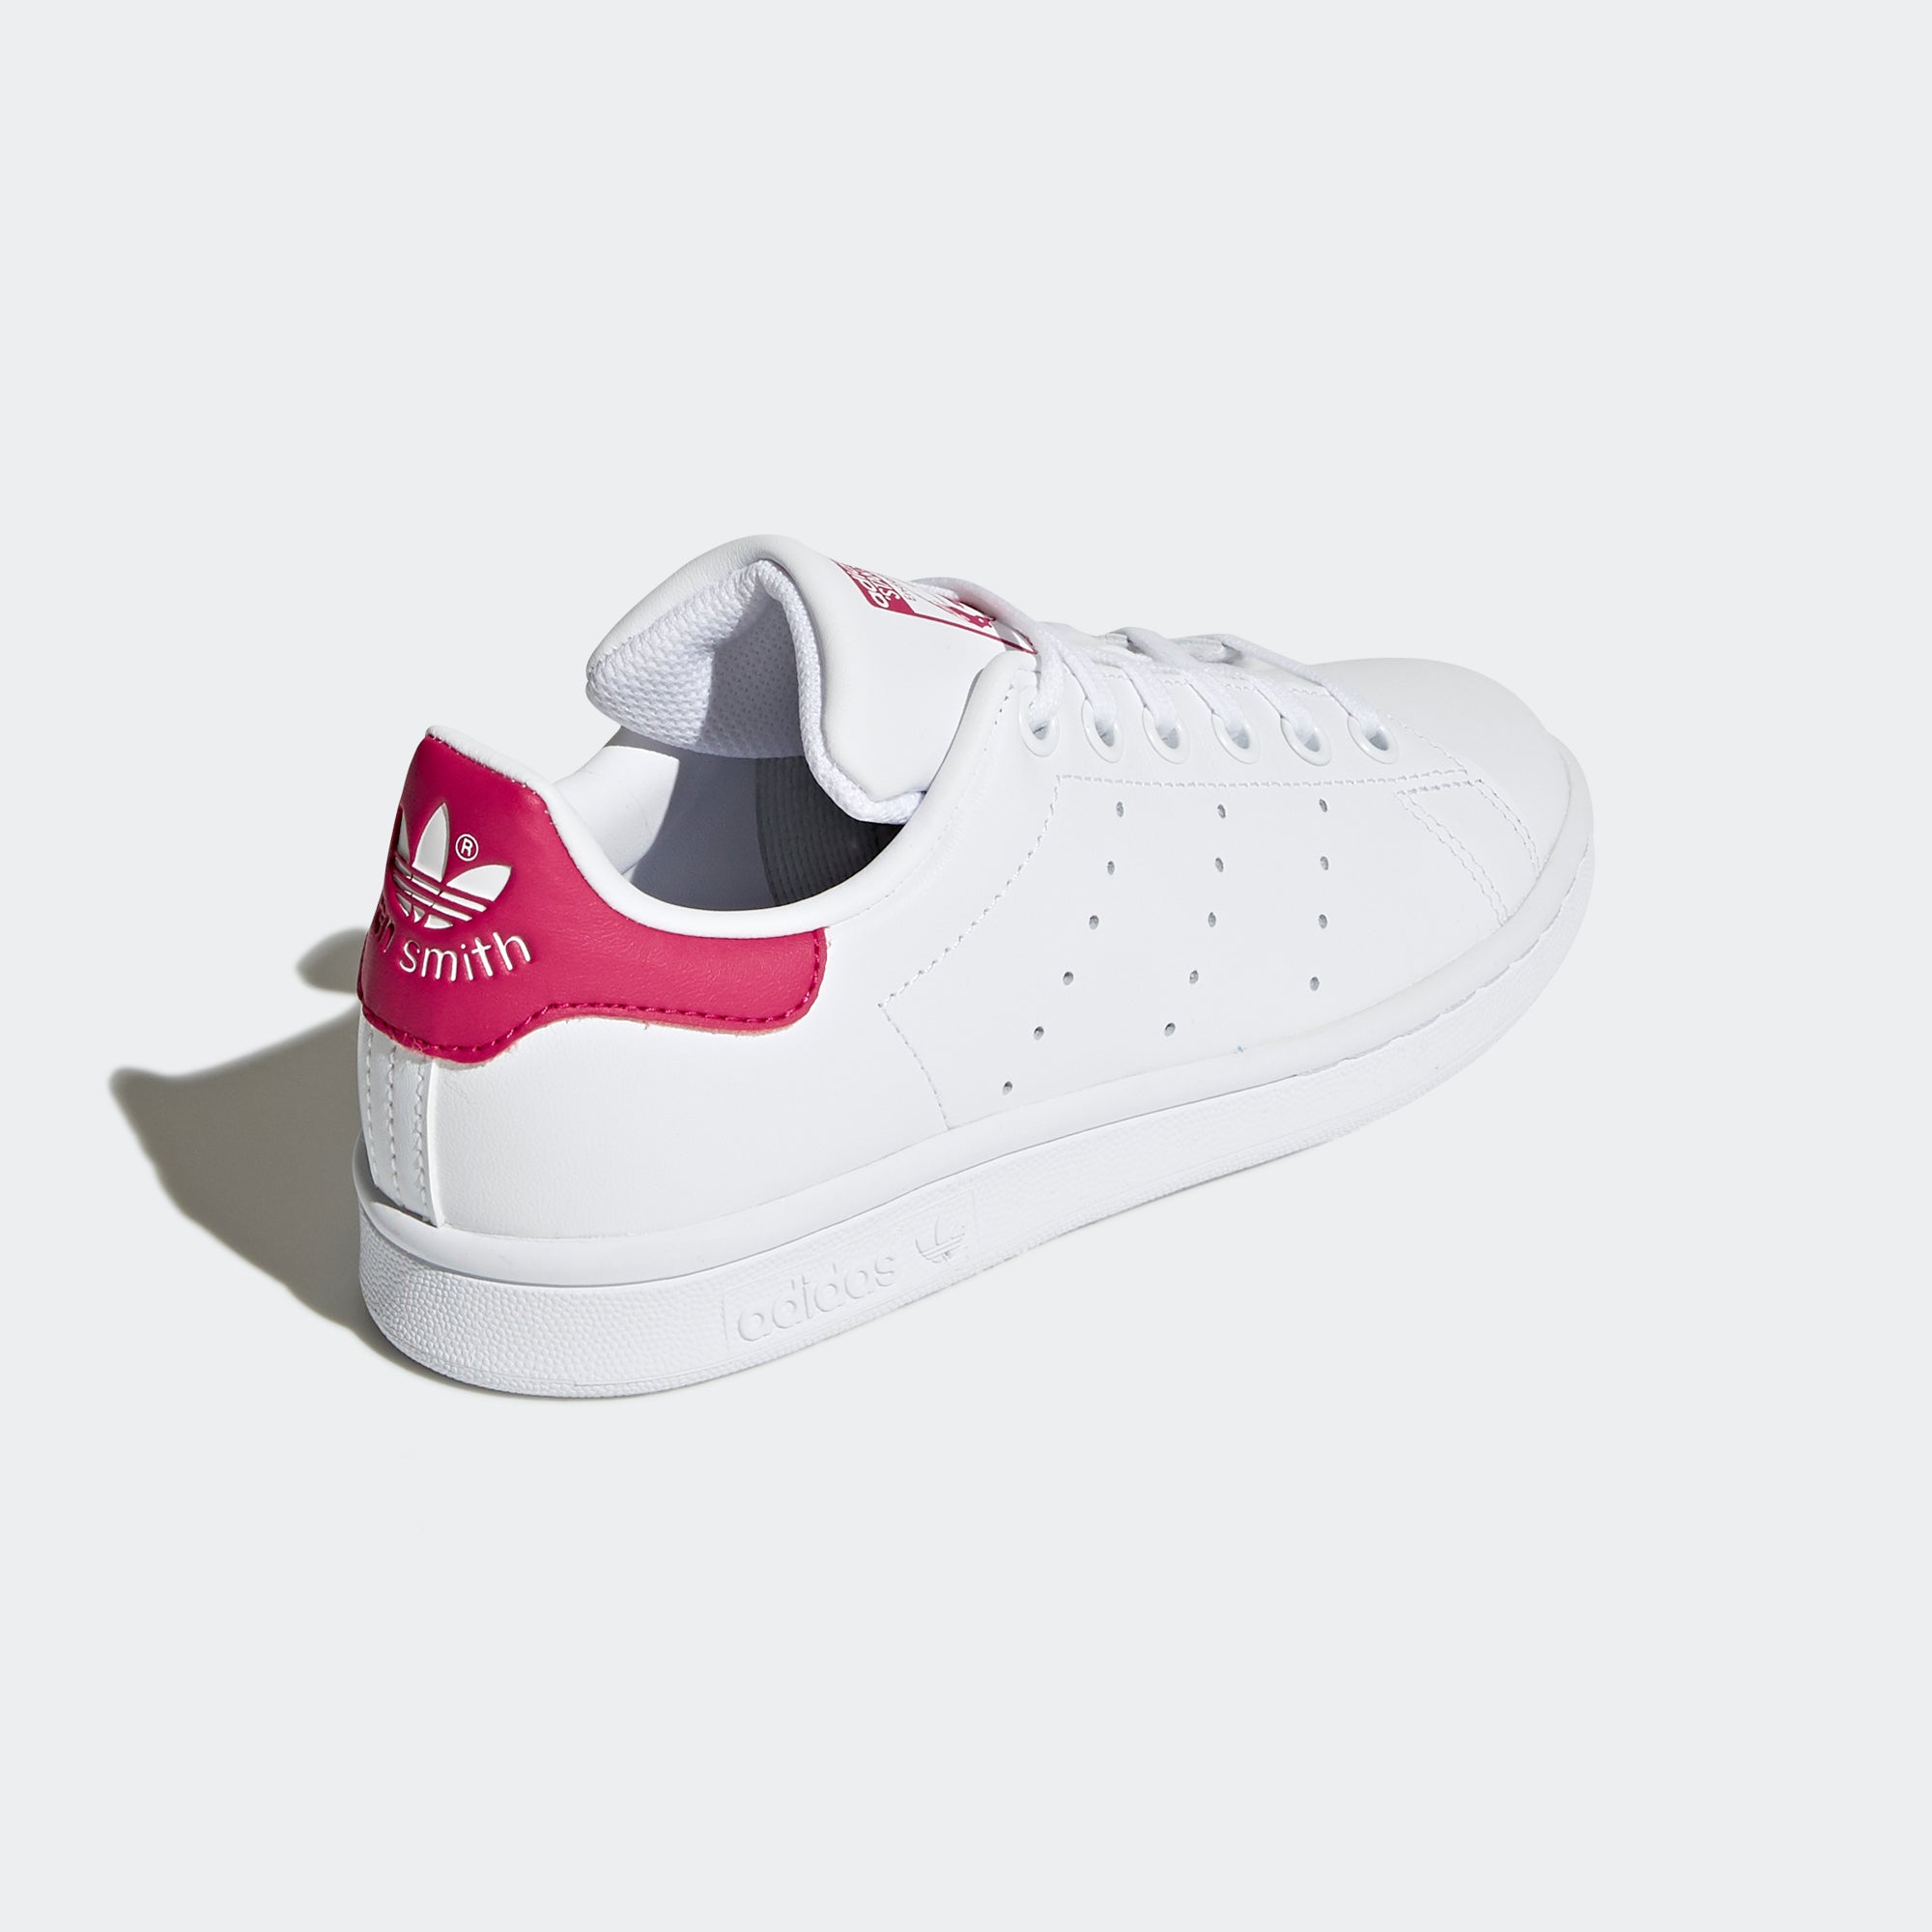 Sports Stan adidas City Smith | Shoes Chicago Pink White B32703 Bold